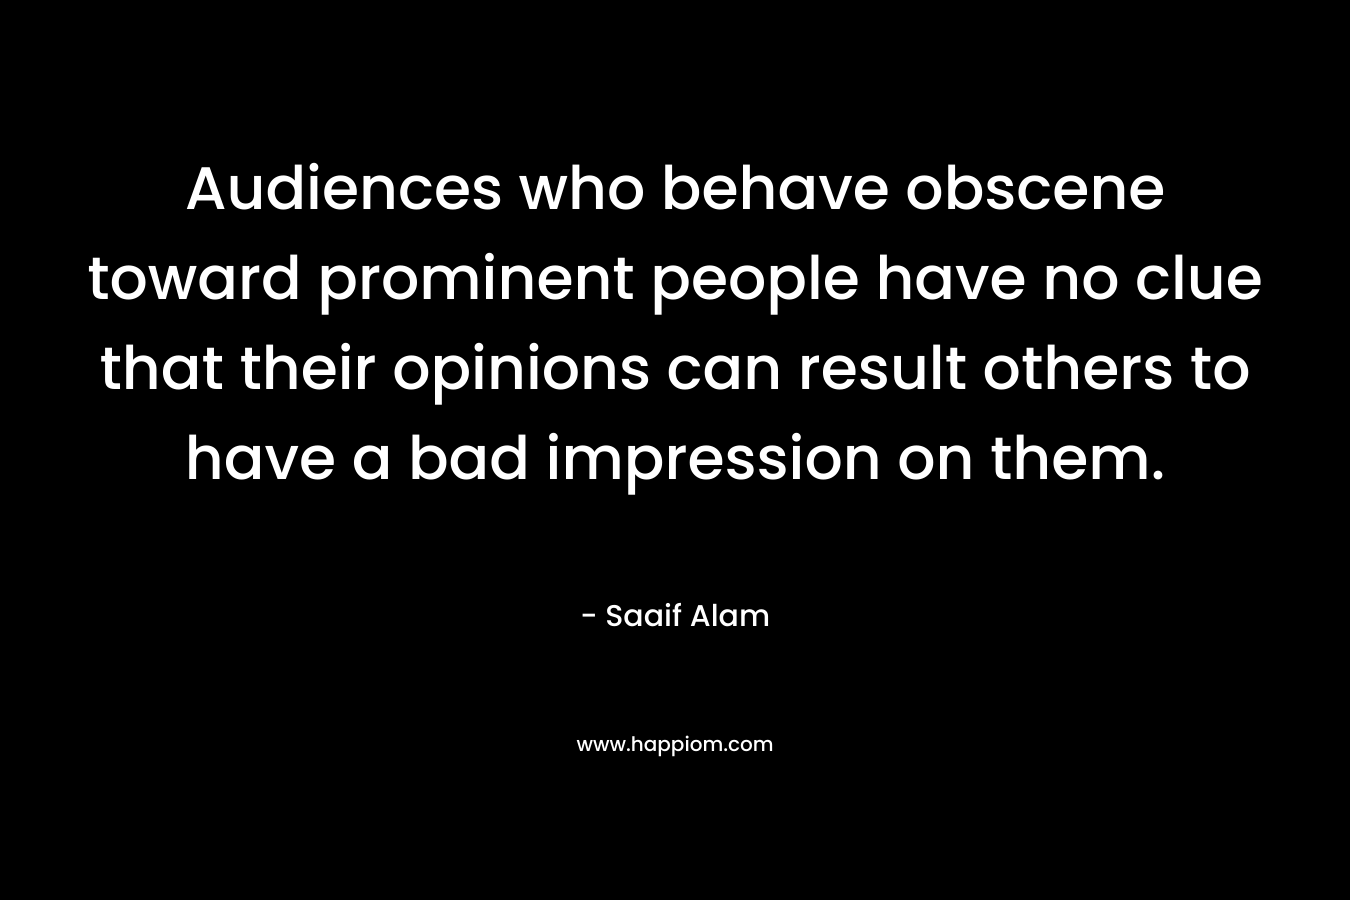 Audiences who behave obscene toward prominent people have no clue that their opinions can result others to have a bad impression on them. – Saaif Alam